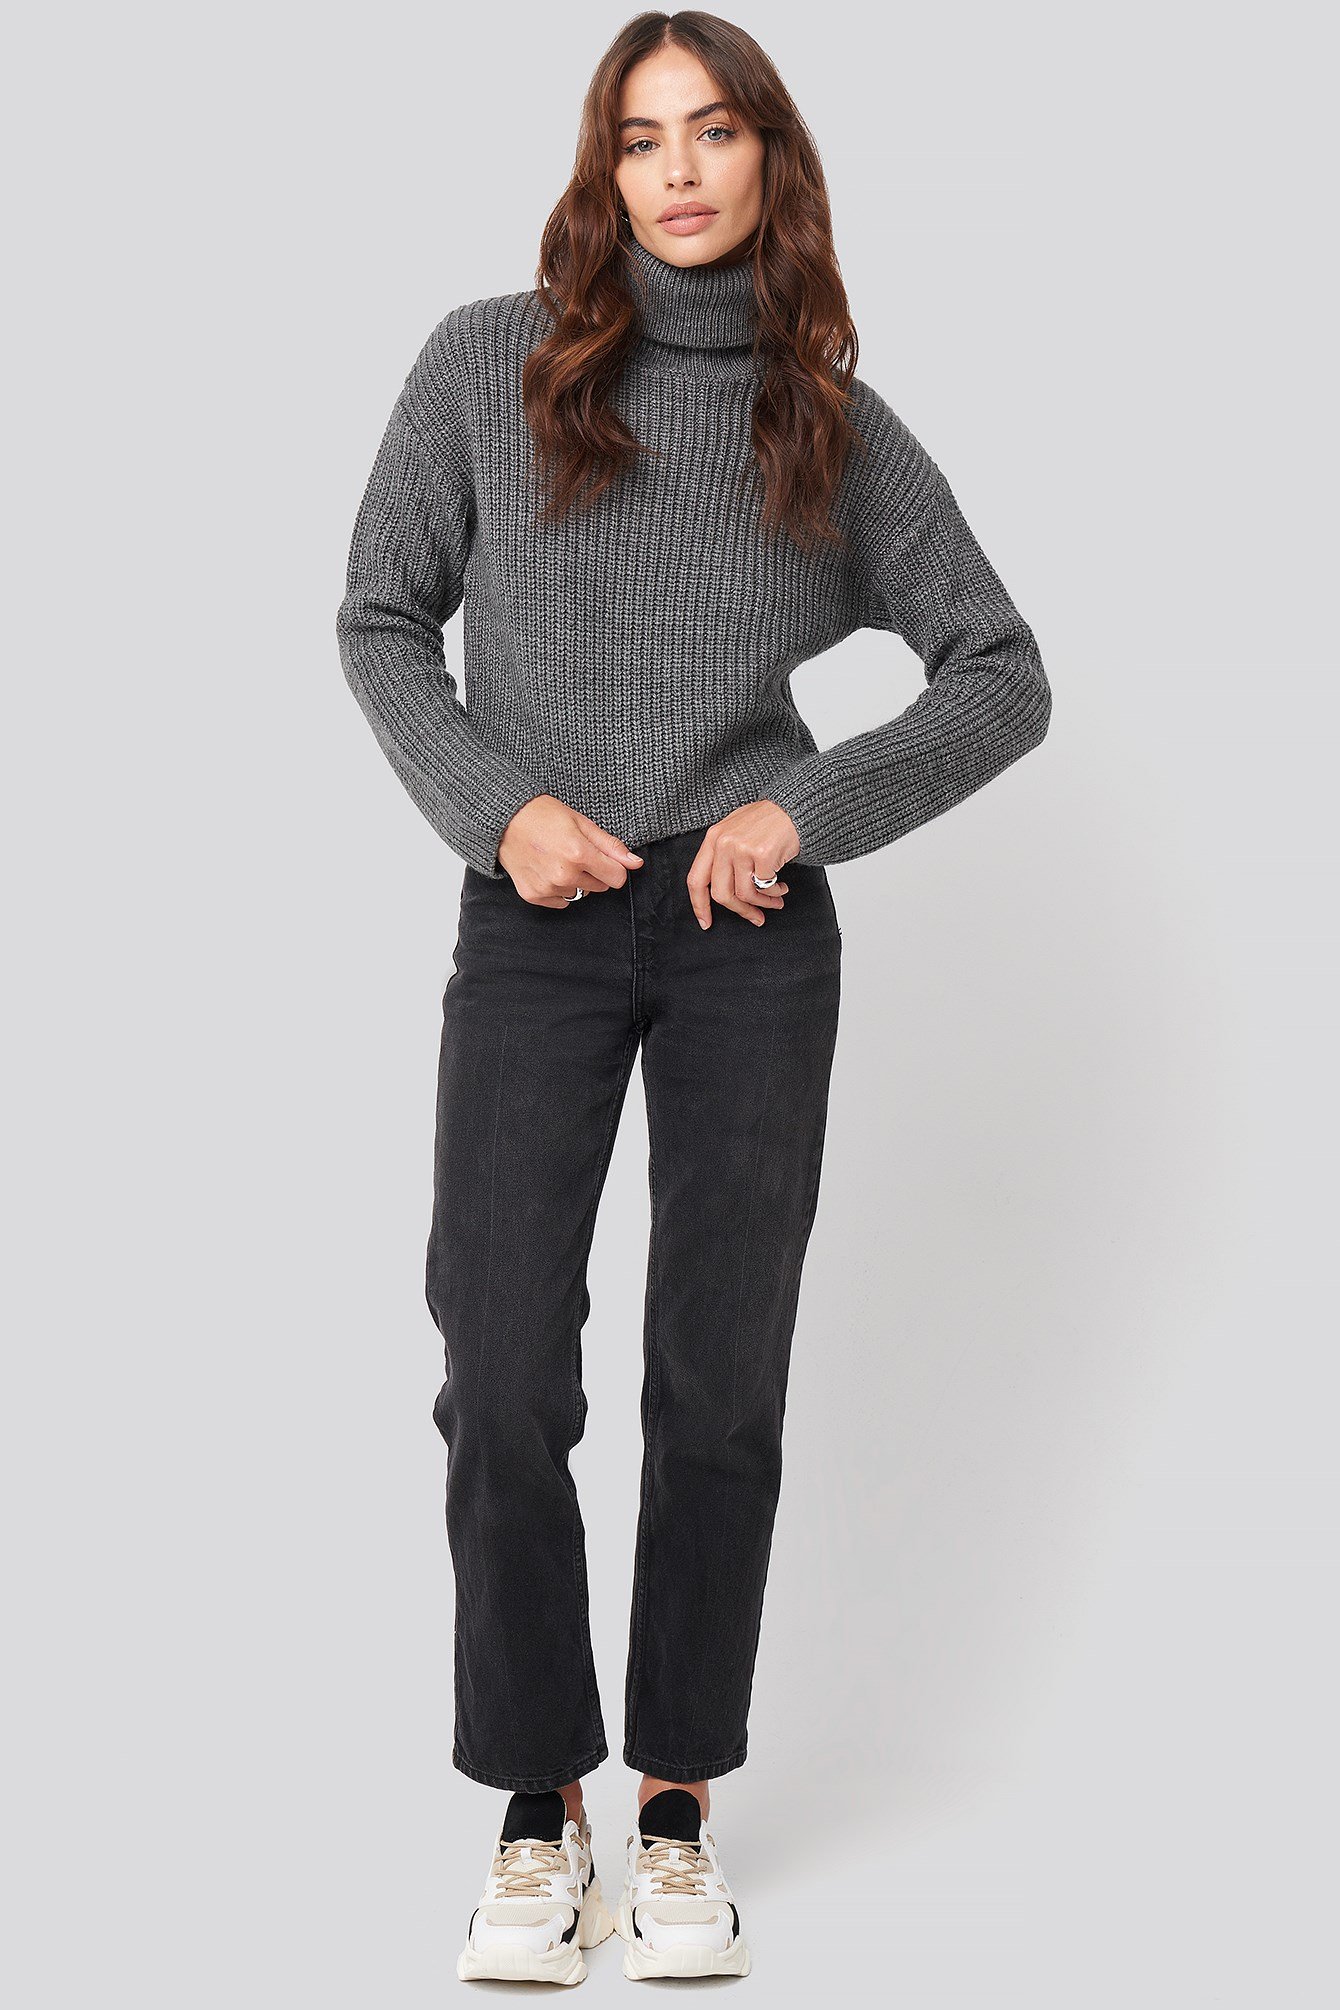 Folded Polo Neck Knitted Sweater Grey Outfit.